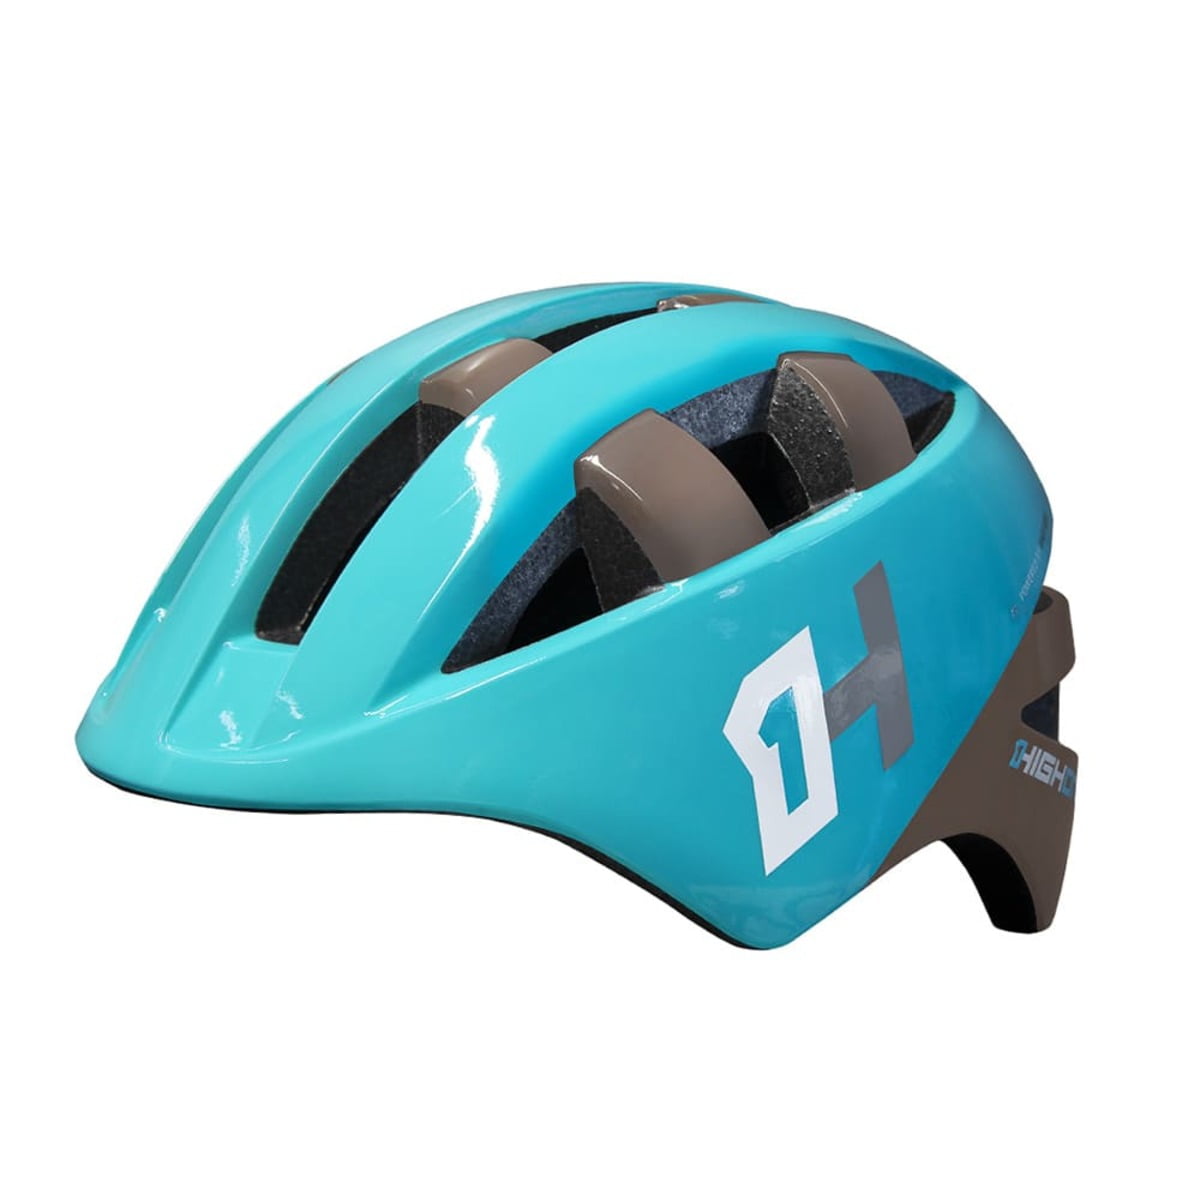 Capacete High One Baby - Azul/Cinza